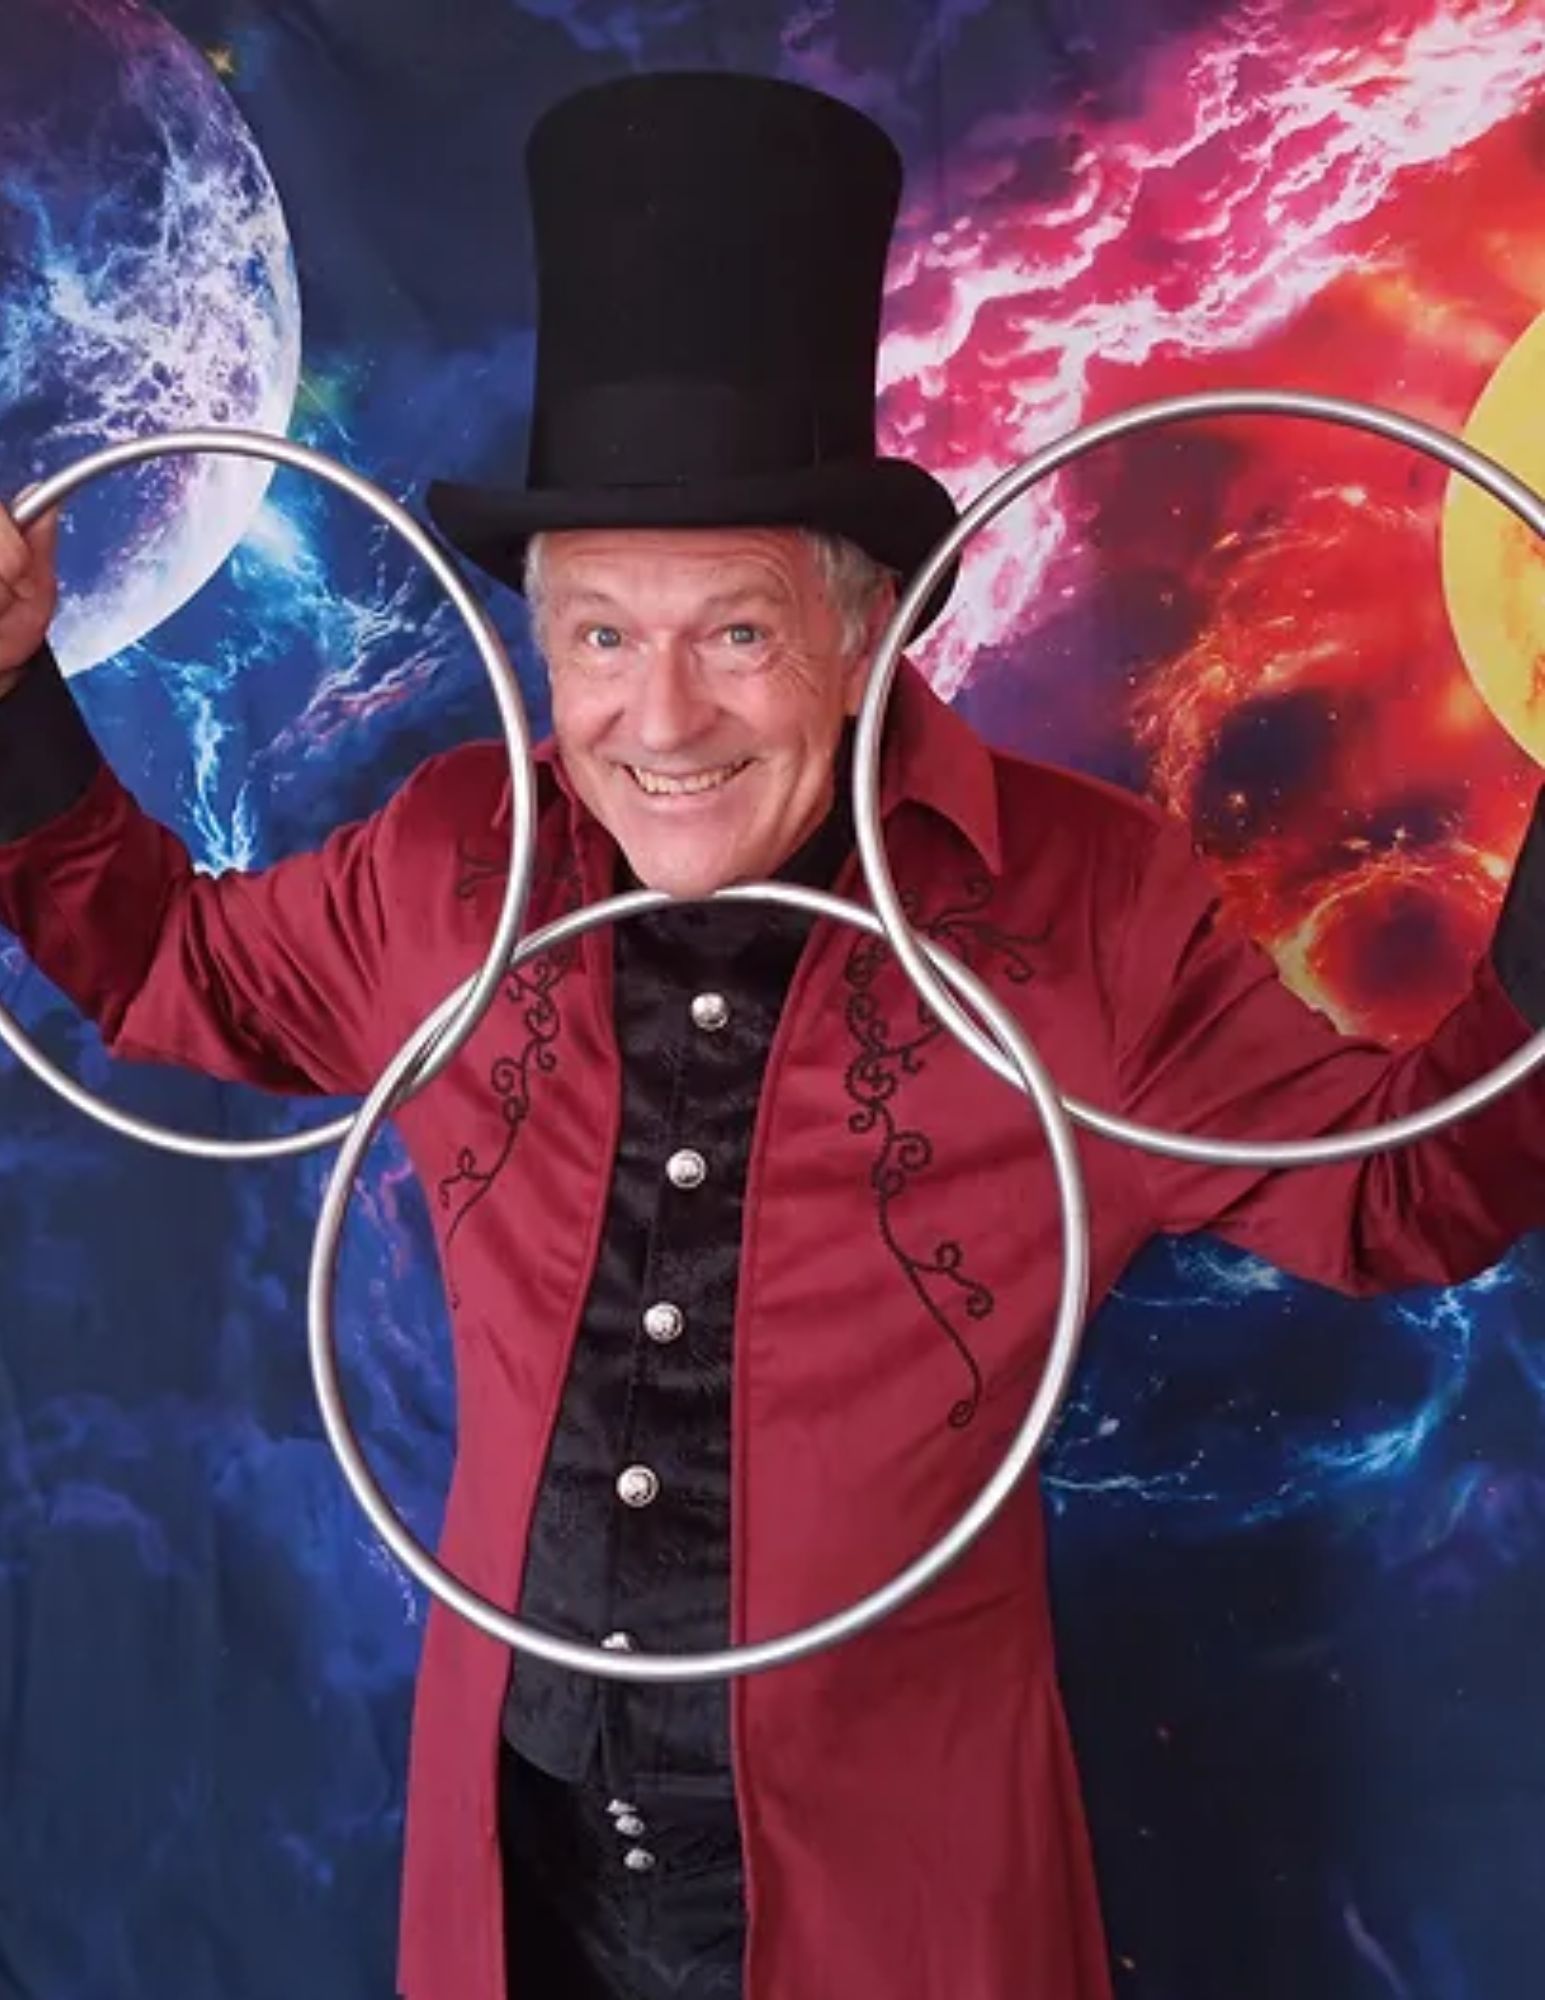 Magician in top hat with magical three rings